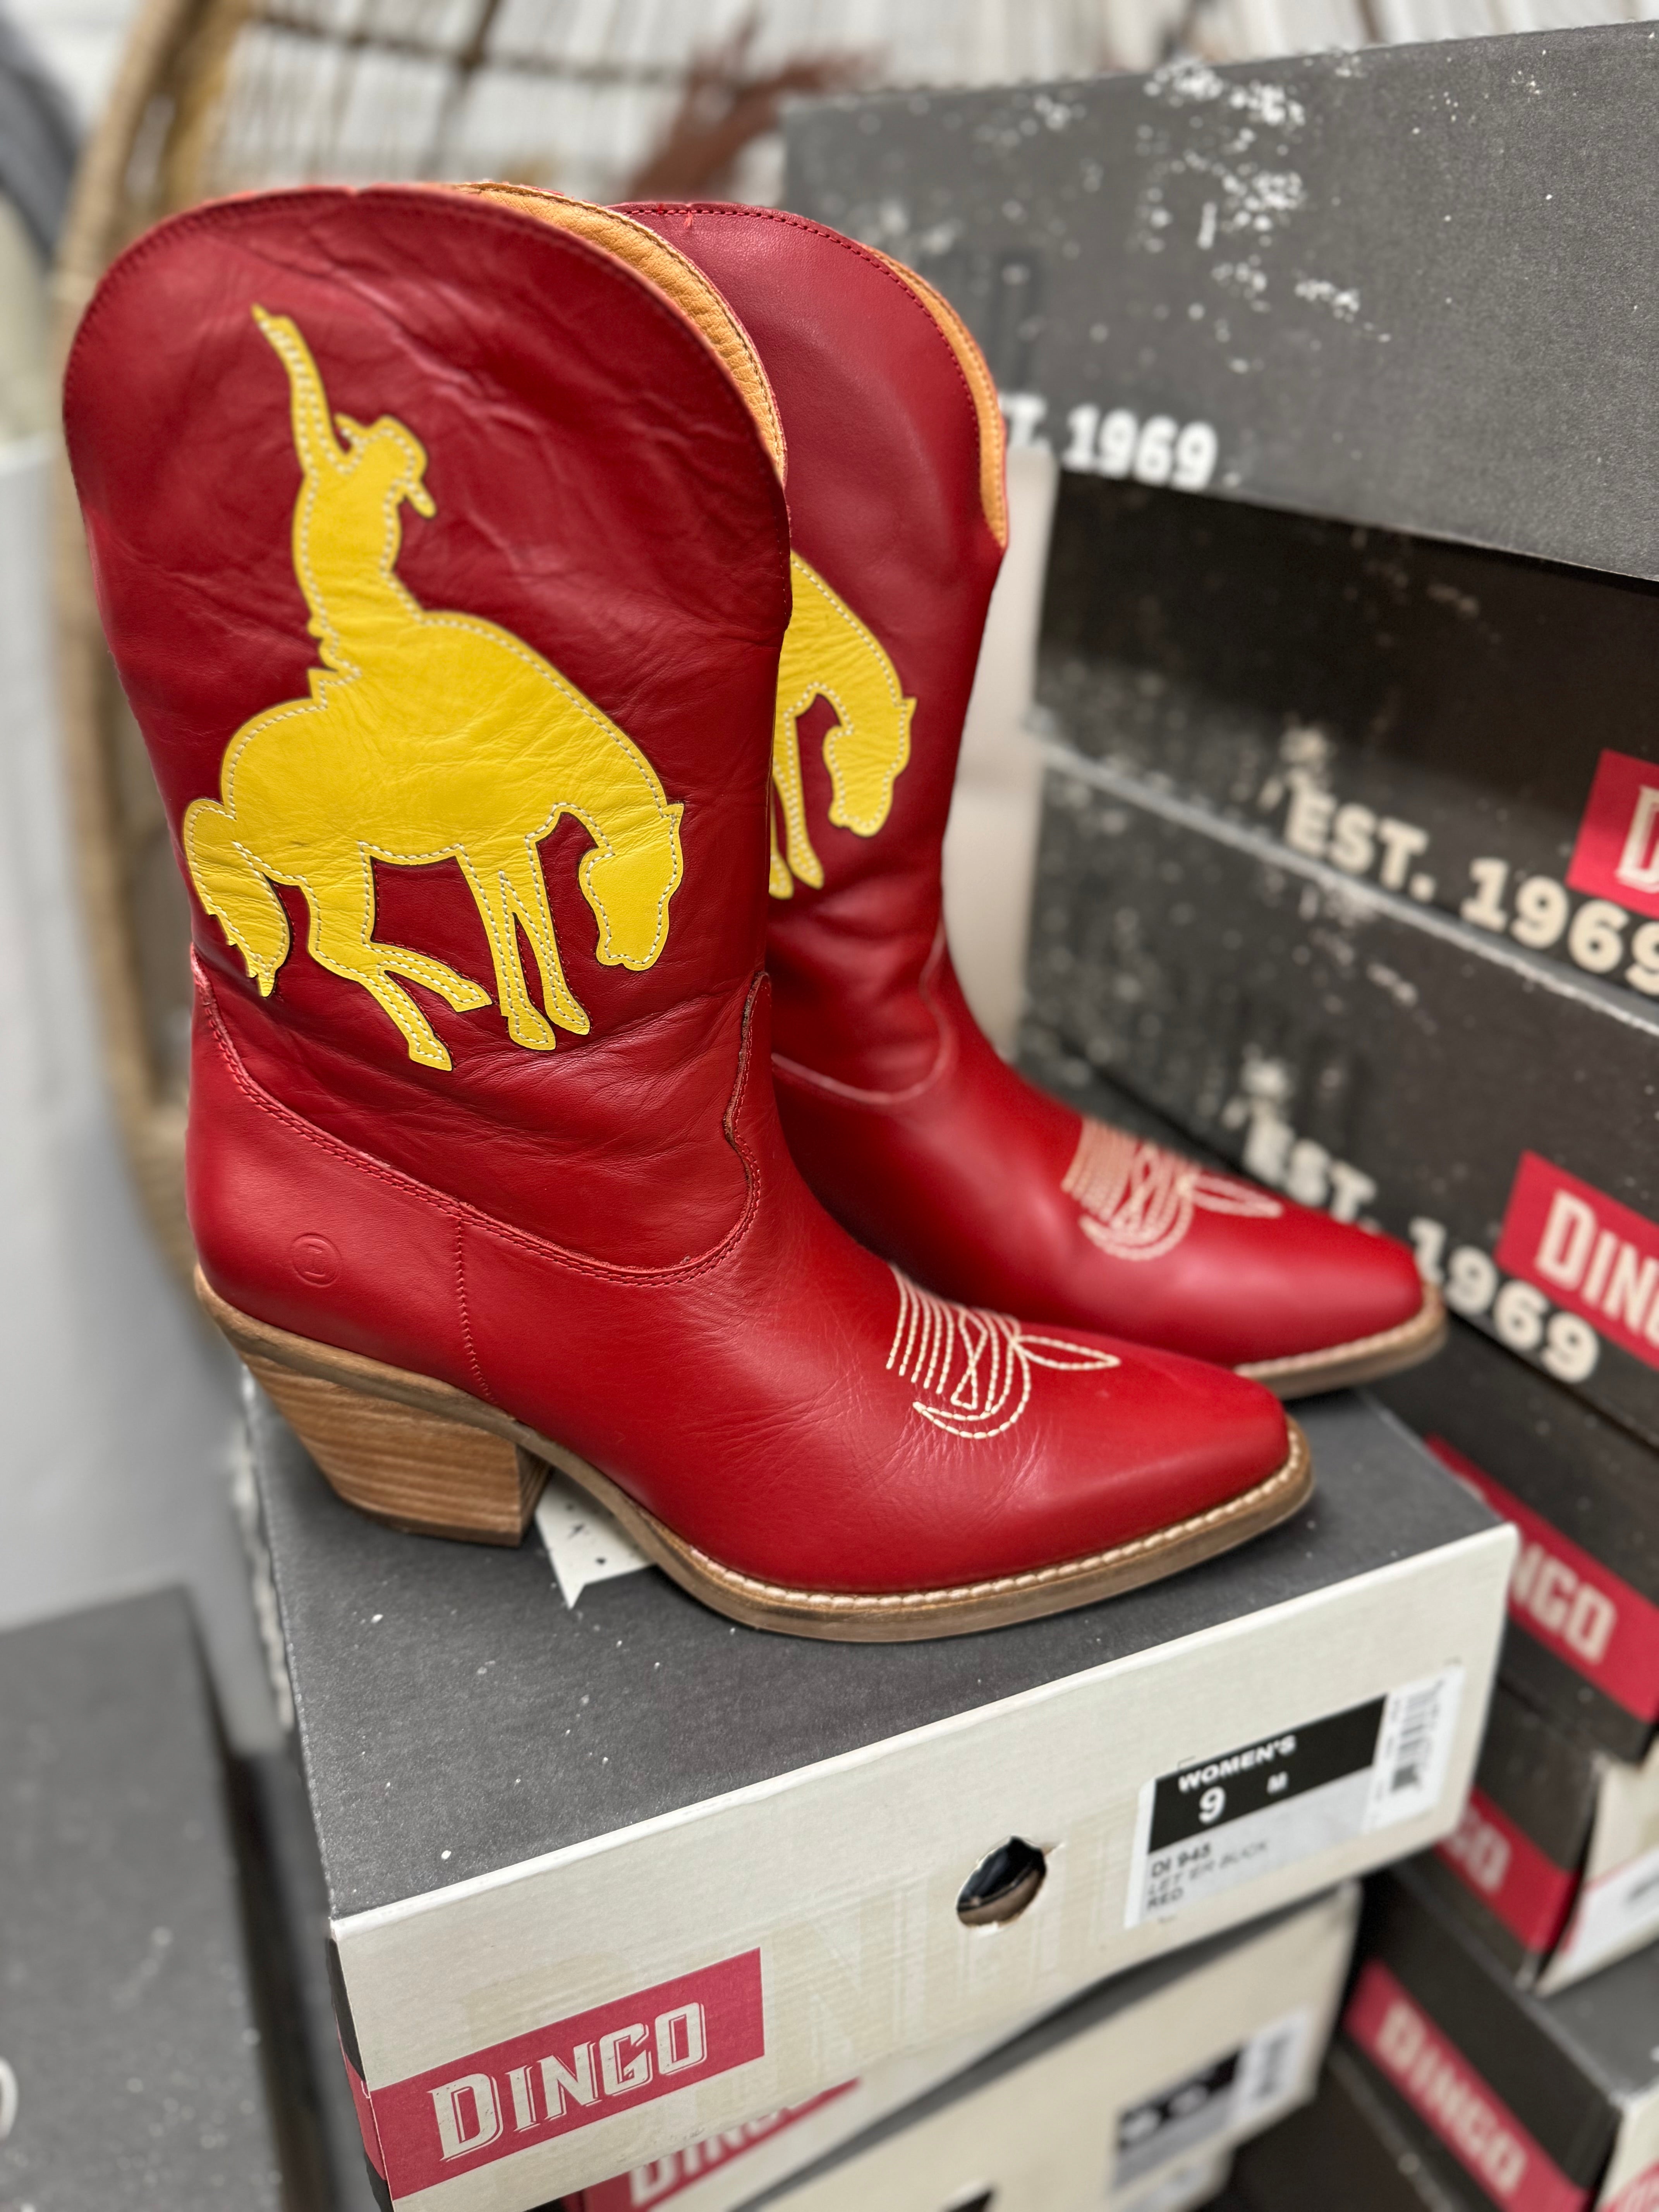 Model Shoes Size 9 | Dingo | Let 'Er Buck Leather Cowboy Boots in Red - FINAL SALE - Giddy Up Glamour Boutique